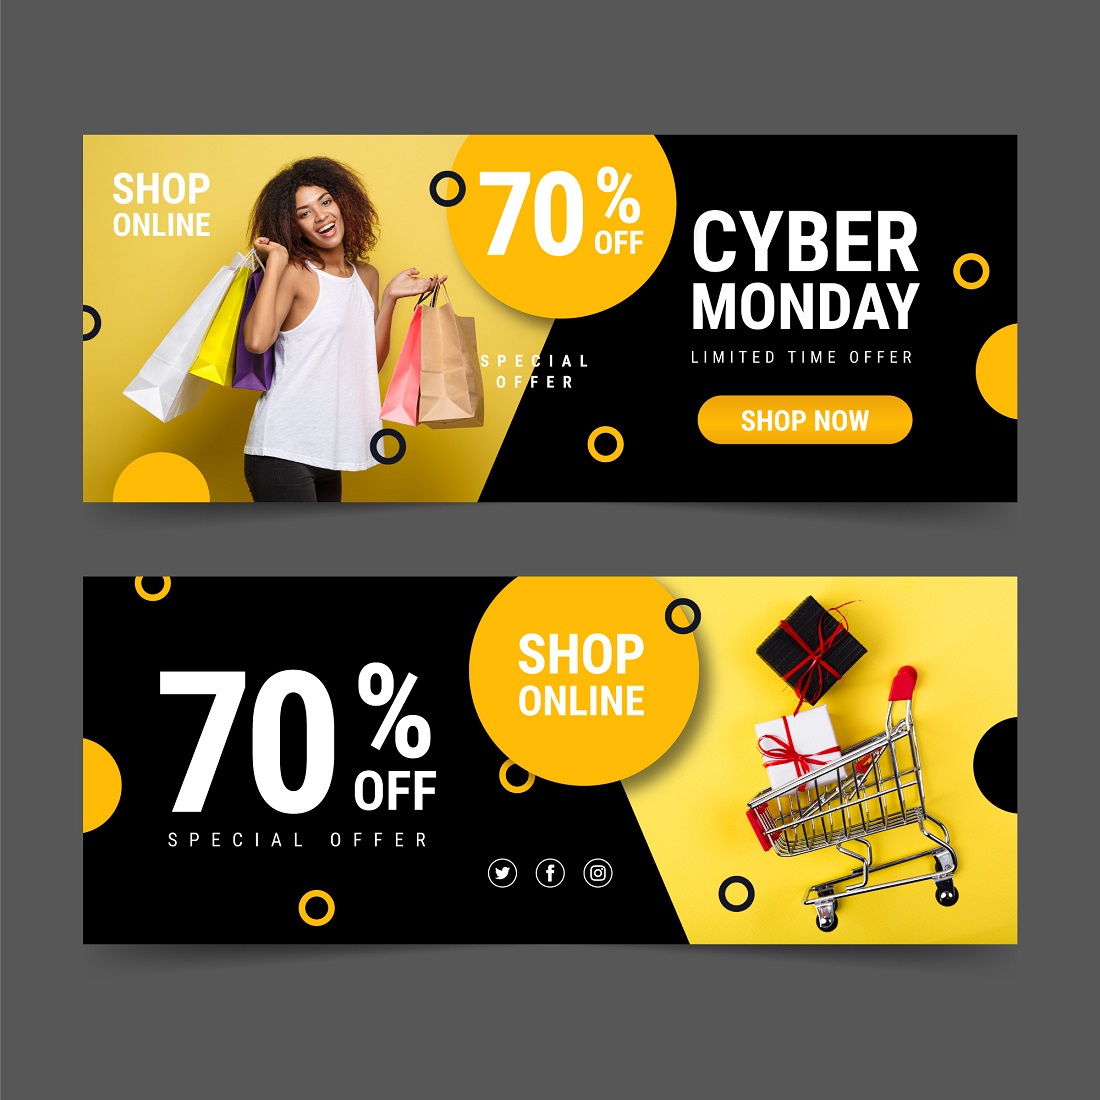 Cyber Monday banners preview image.